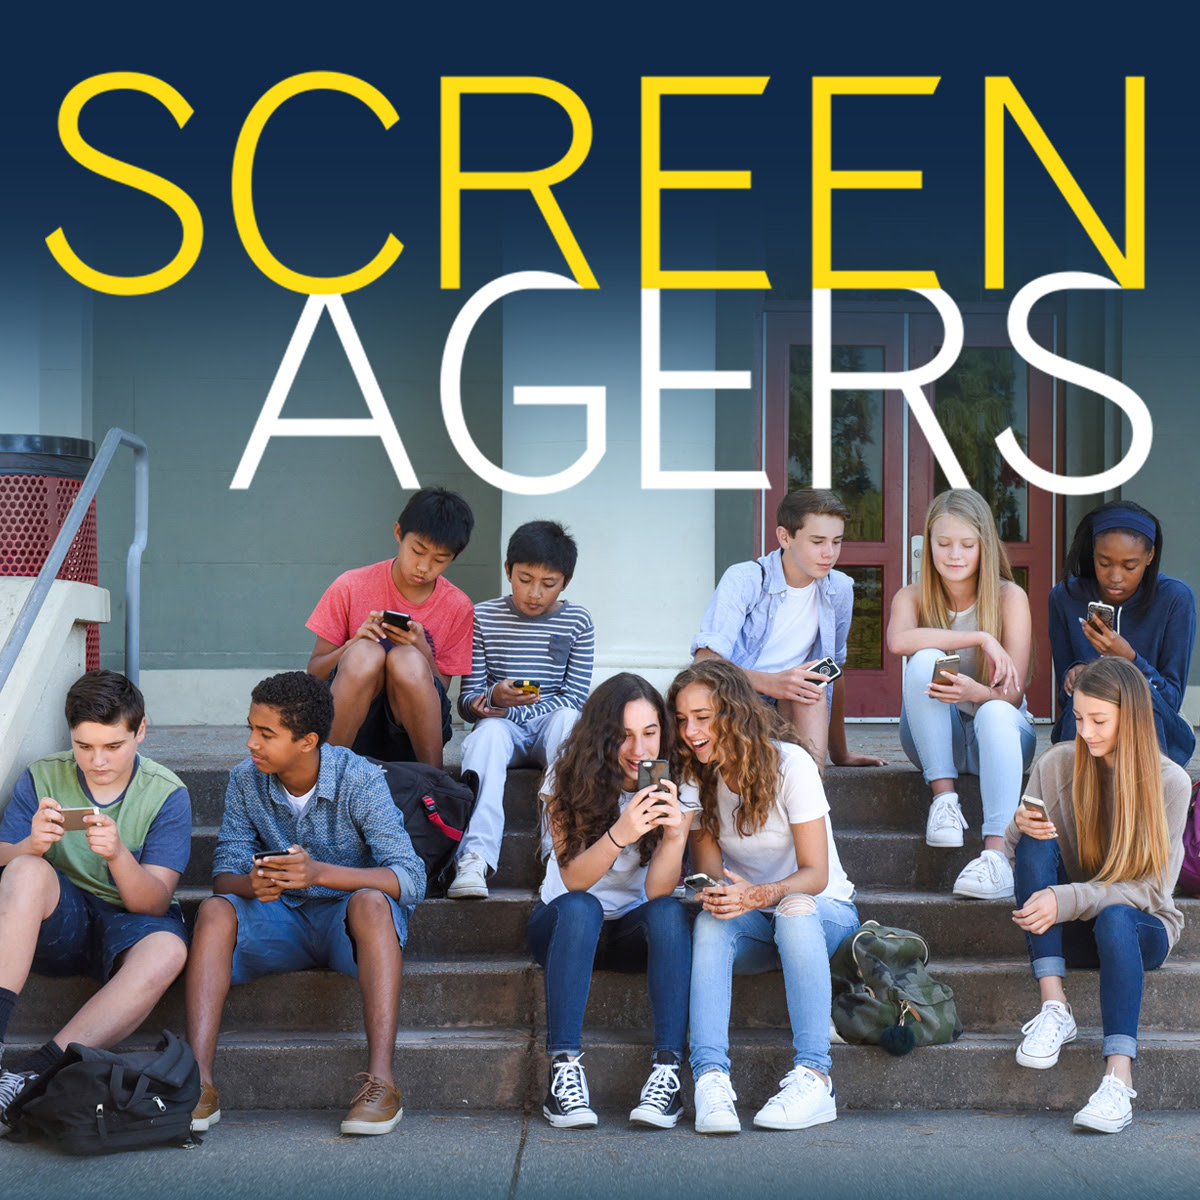 Screenagers Film Presented By Jane Goodall Environmental Sciences Academy